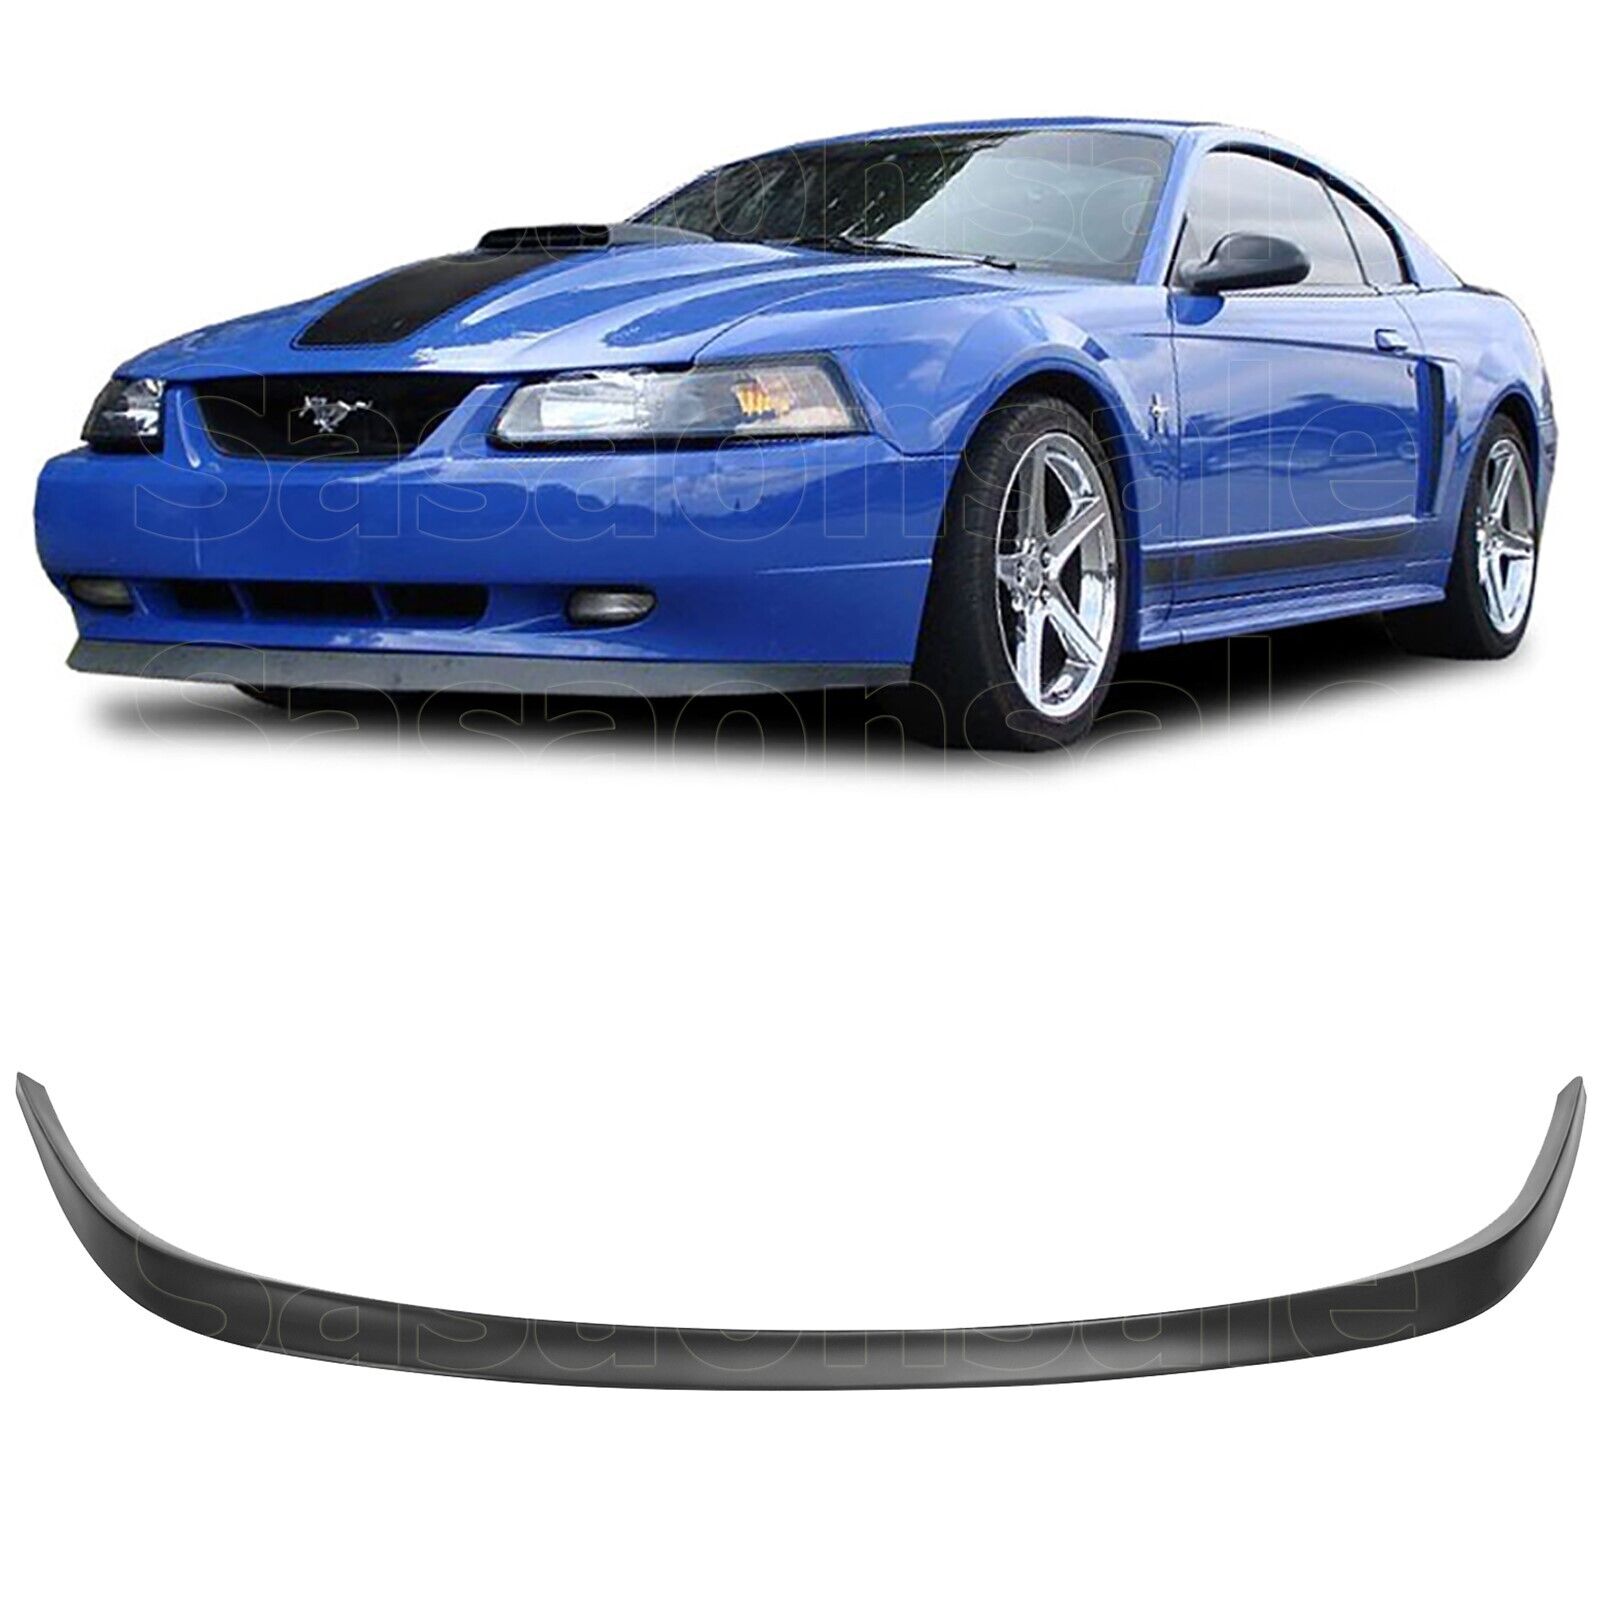 [SASA] Fit for 99-04 Ford Mustang GT V8 Mach 1 OE PU Front Bumper Lip Splitter